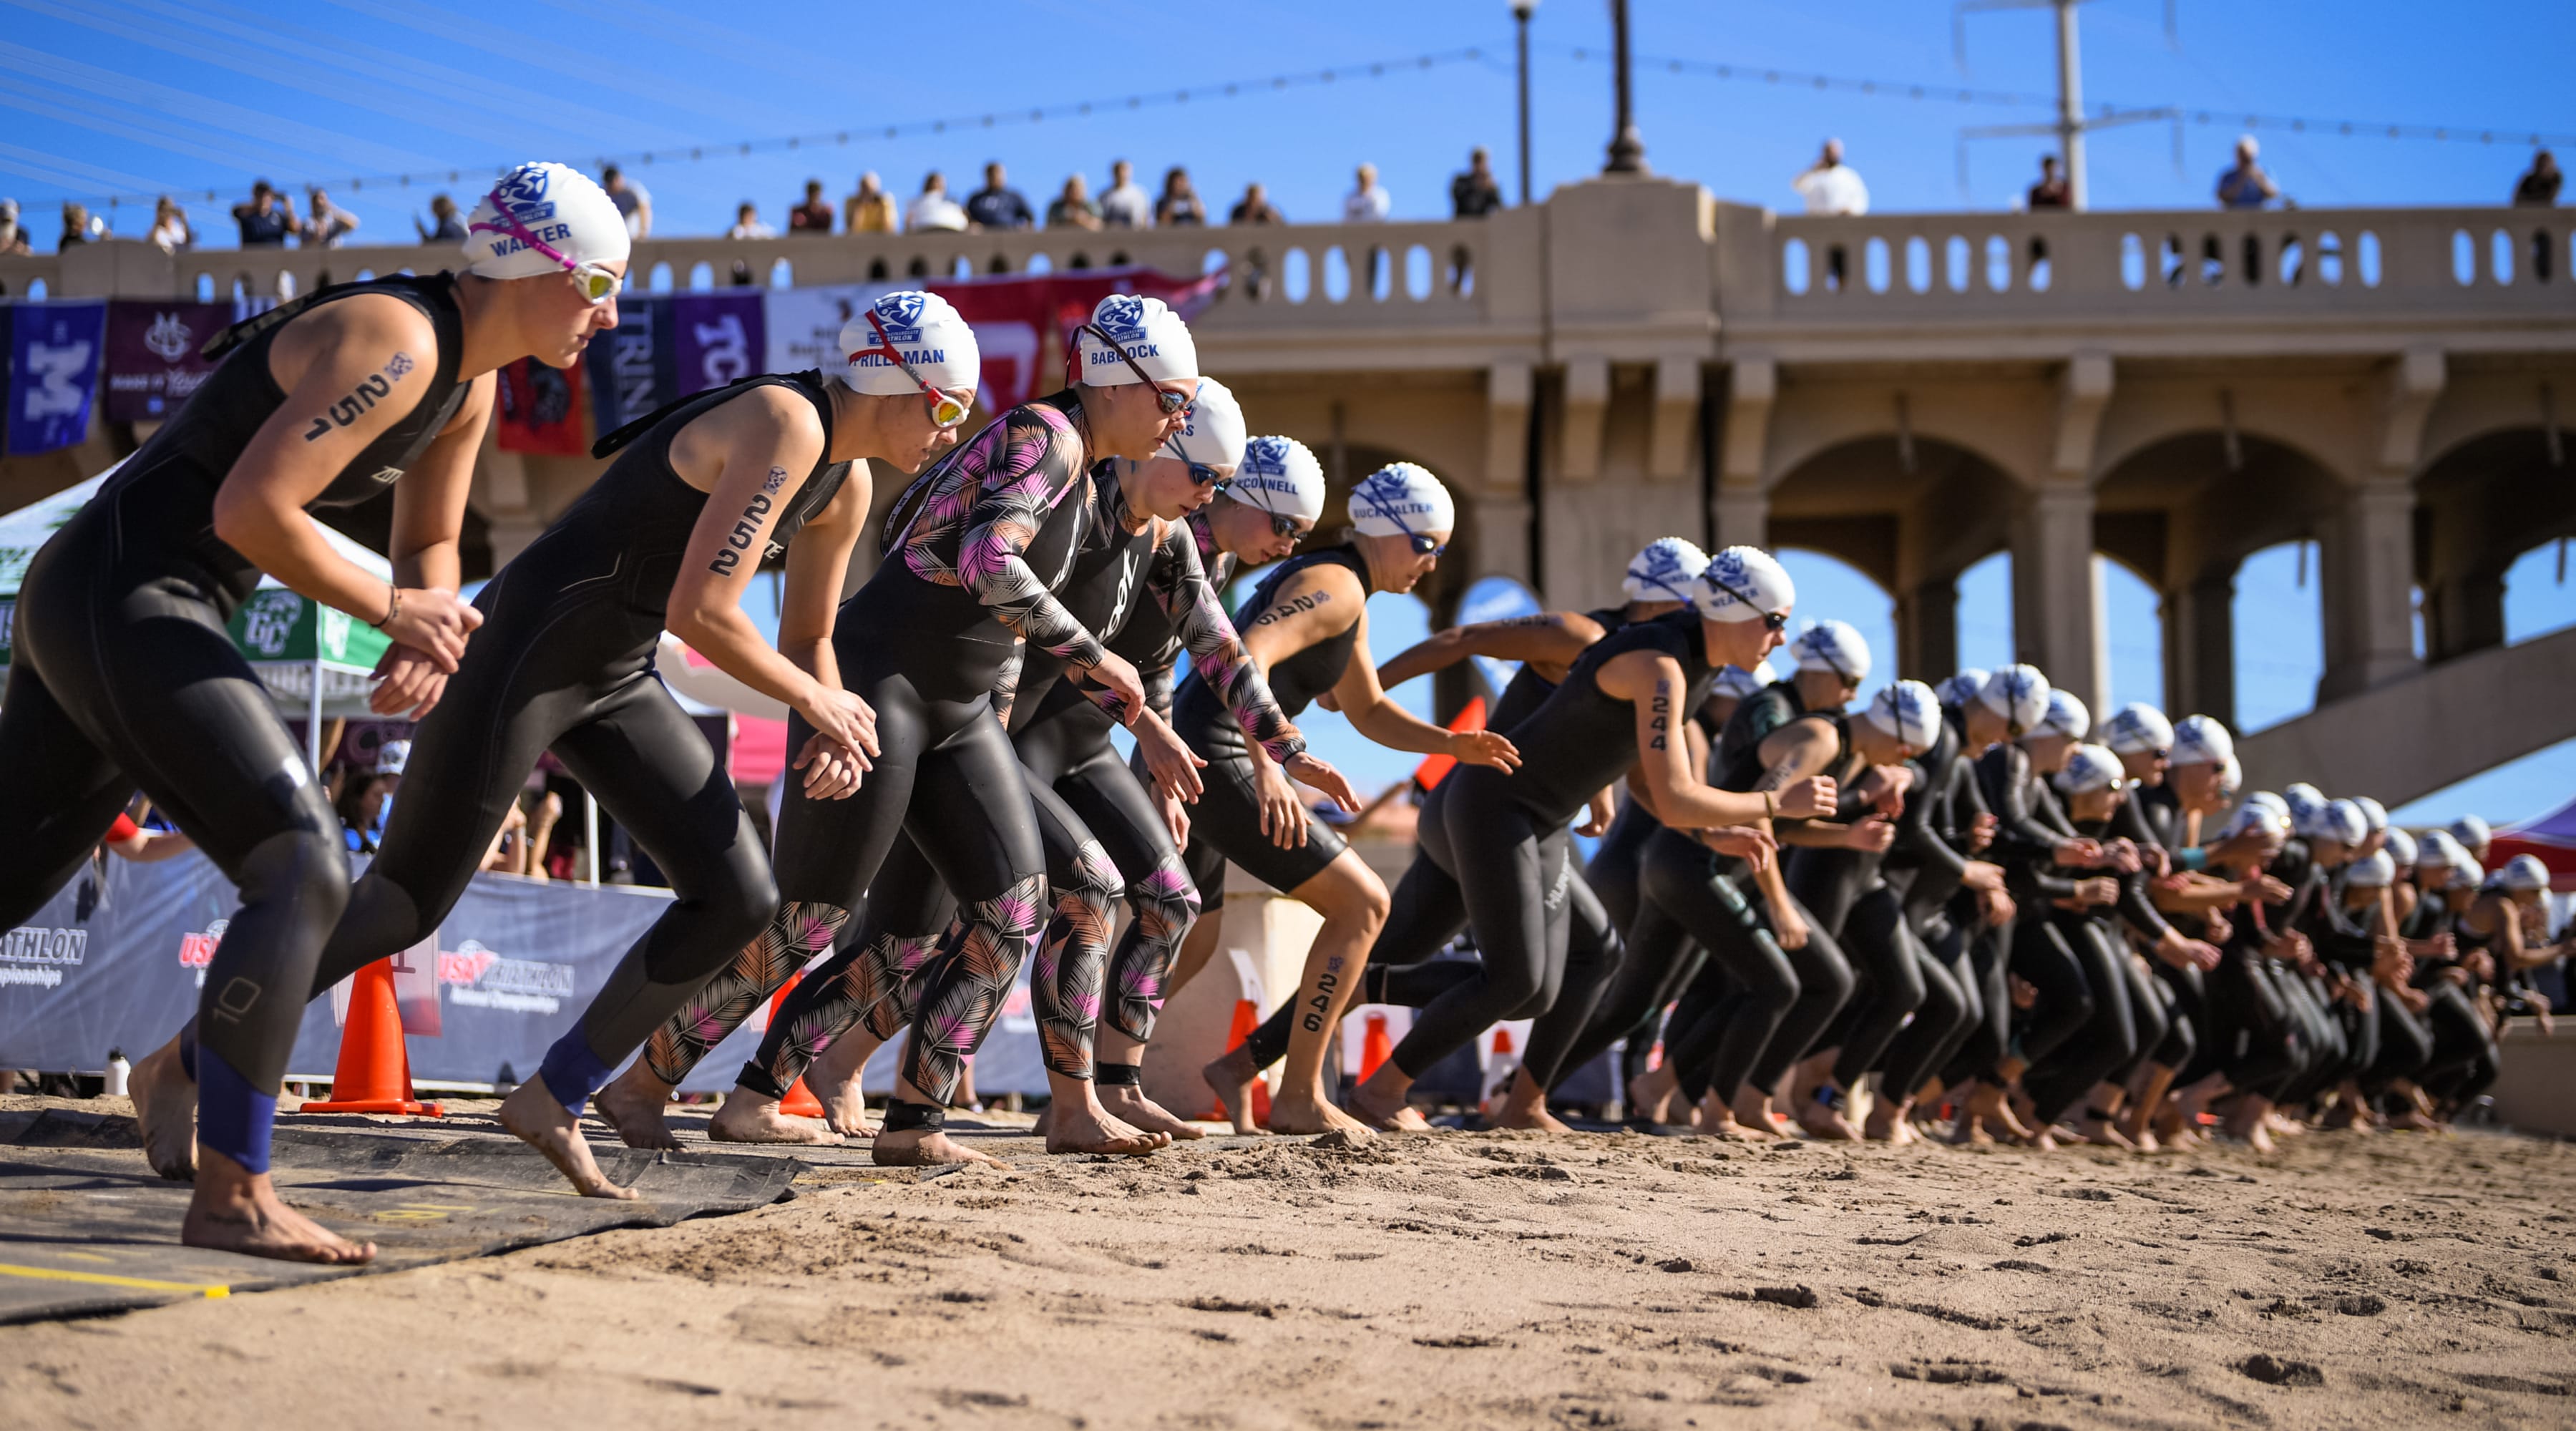 Athletes run on the beach toward water wearing wetsuits and swim caps during a draft-legal race.